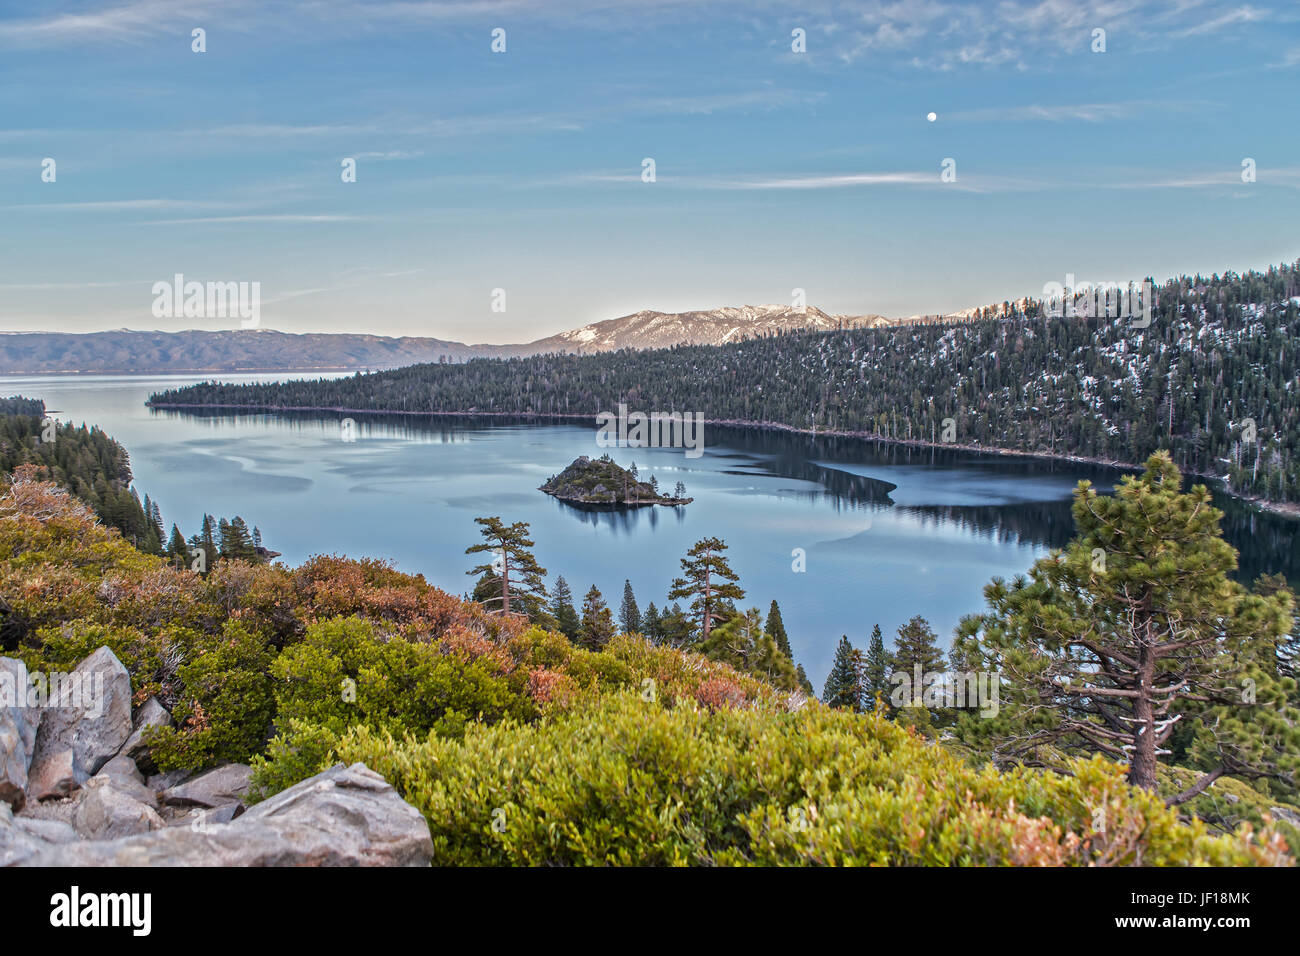 Emerald Bay at the Lake Tahoe on a beautiful Evening Stock Photo